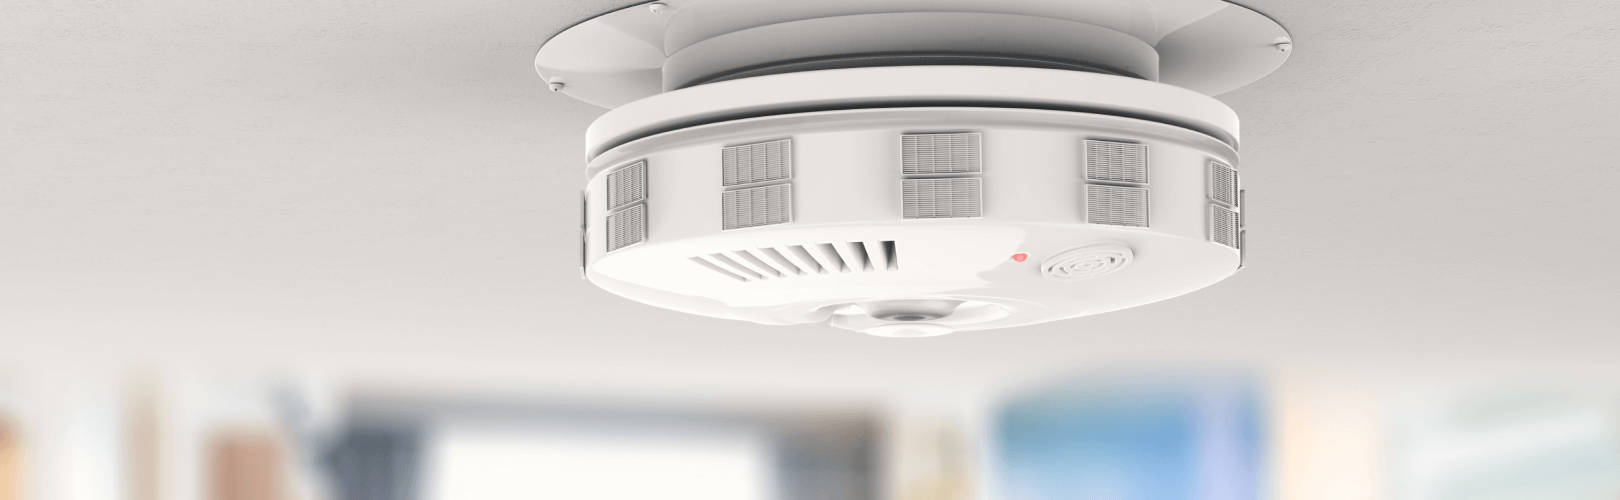 Laser Smoke Detector Market Trend Competitive Landscape and Forecast to 2030